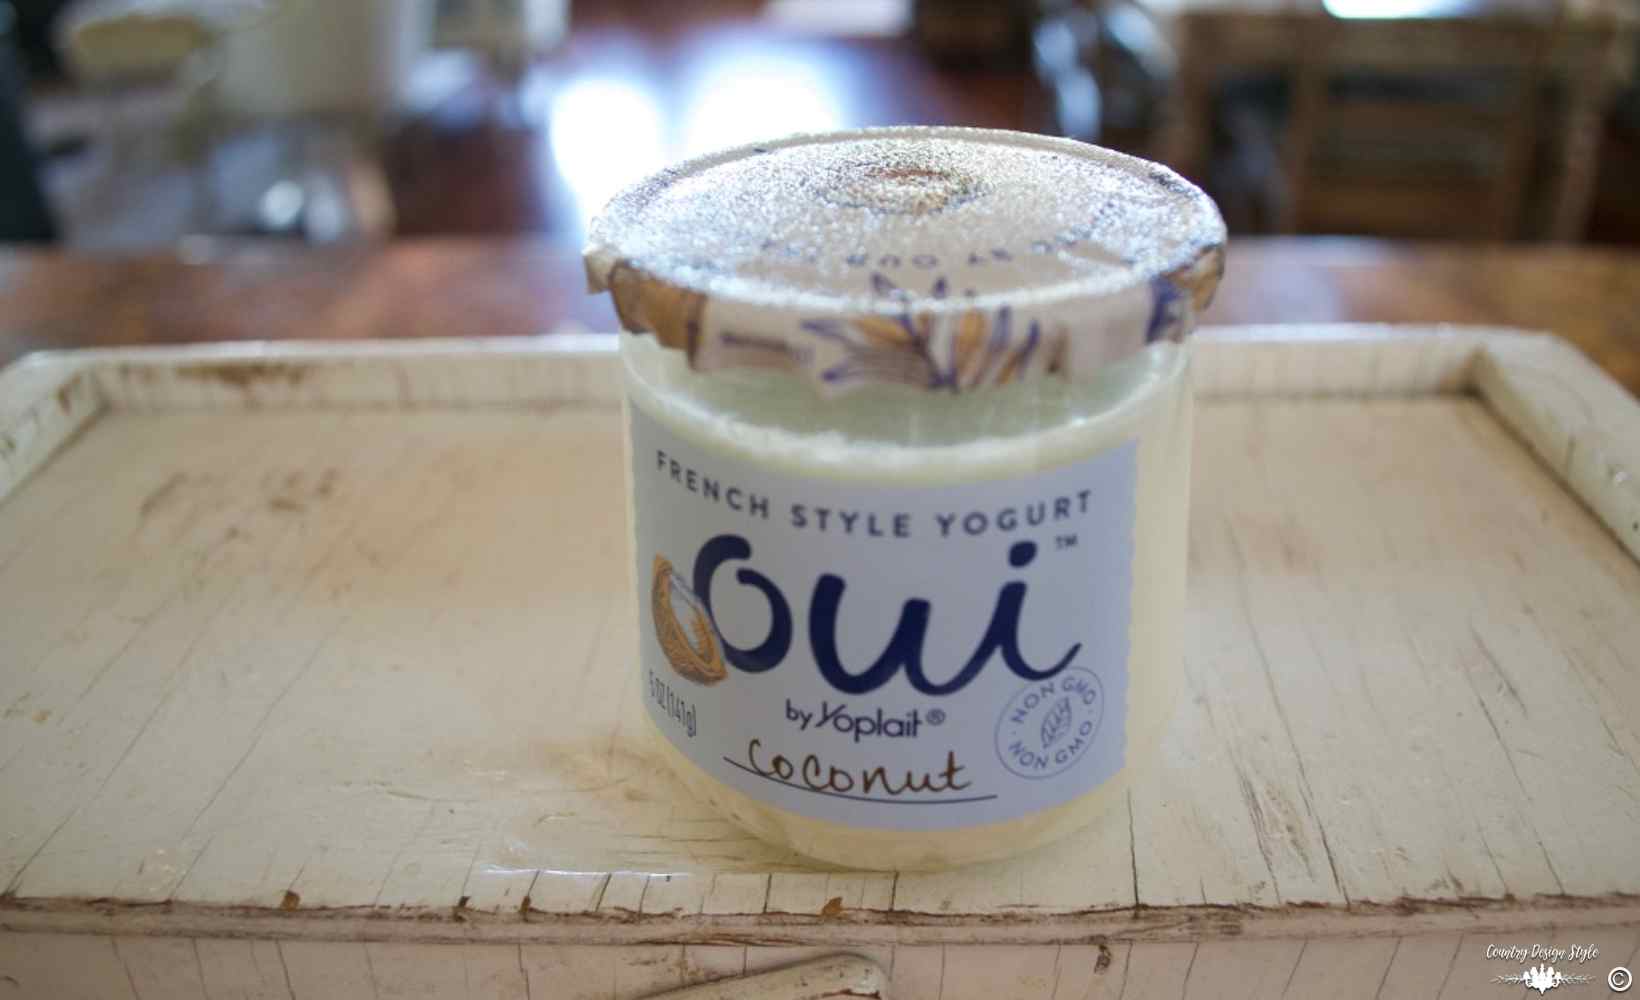 Craft Containers Organizing small items yogurt | Country Design Style | countrydesignstyle.com